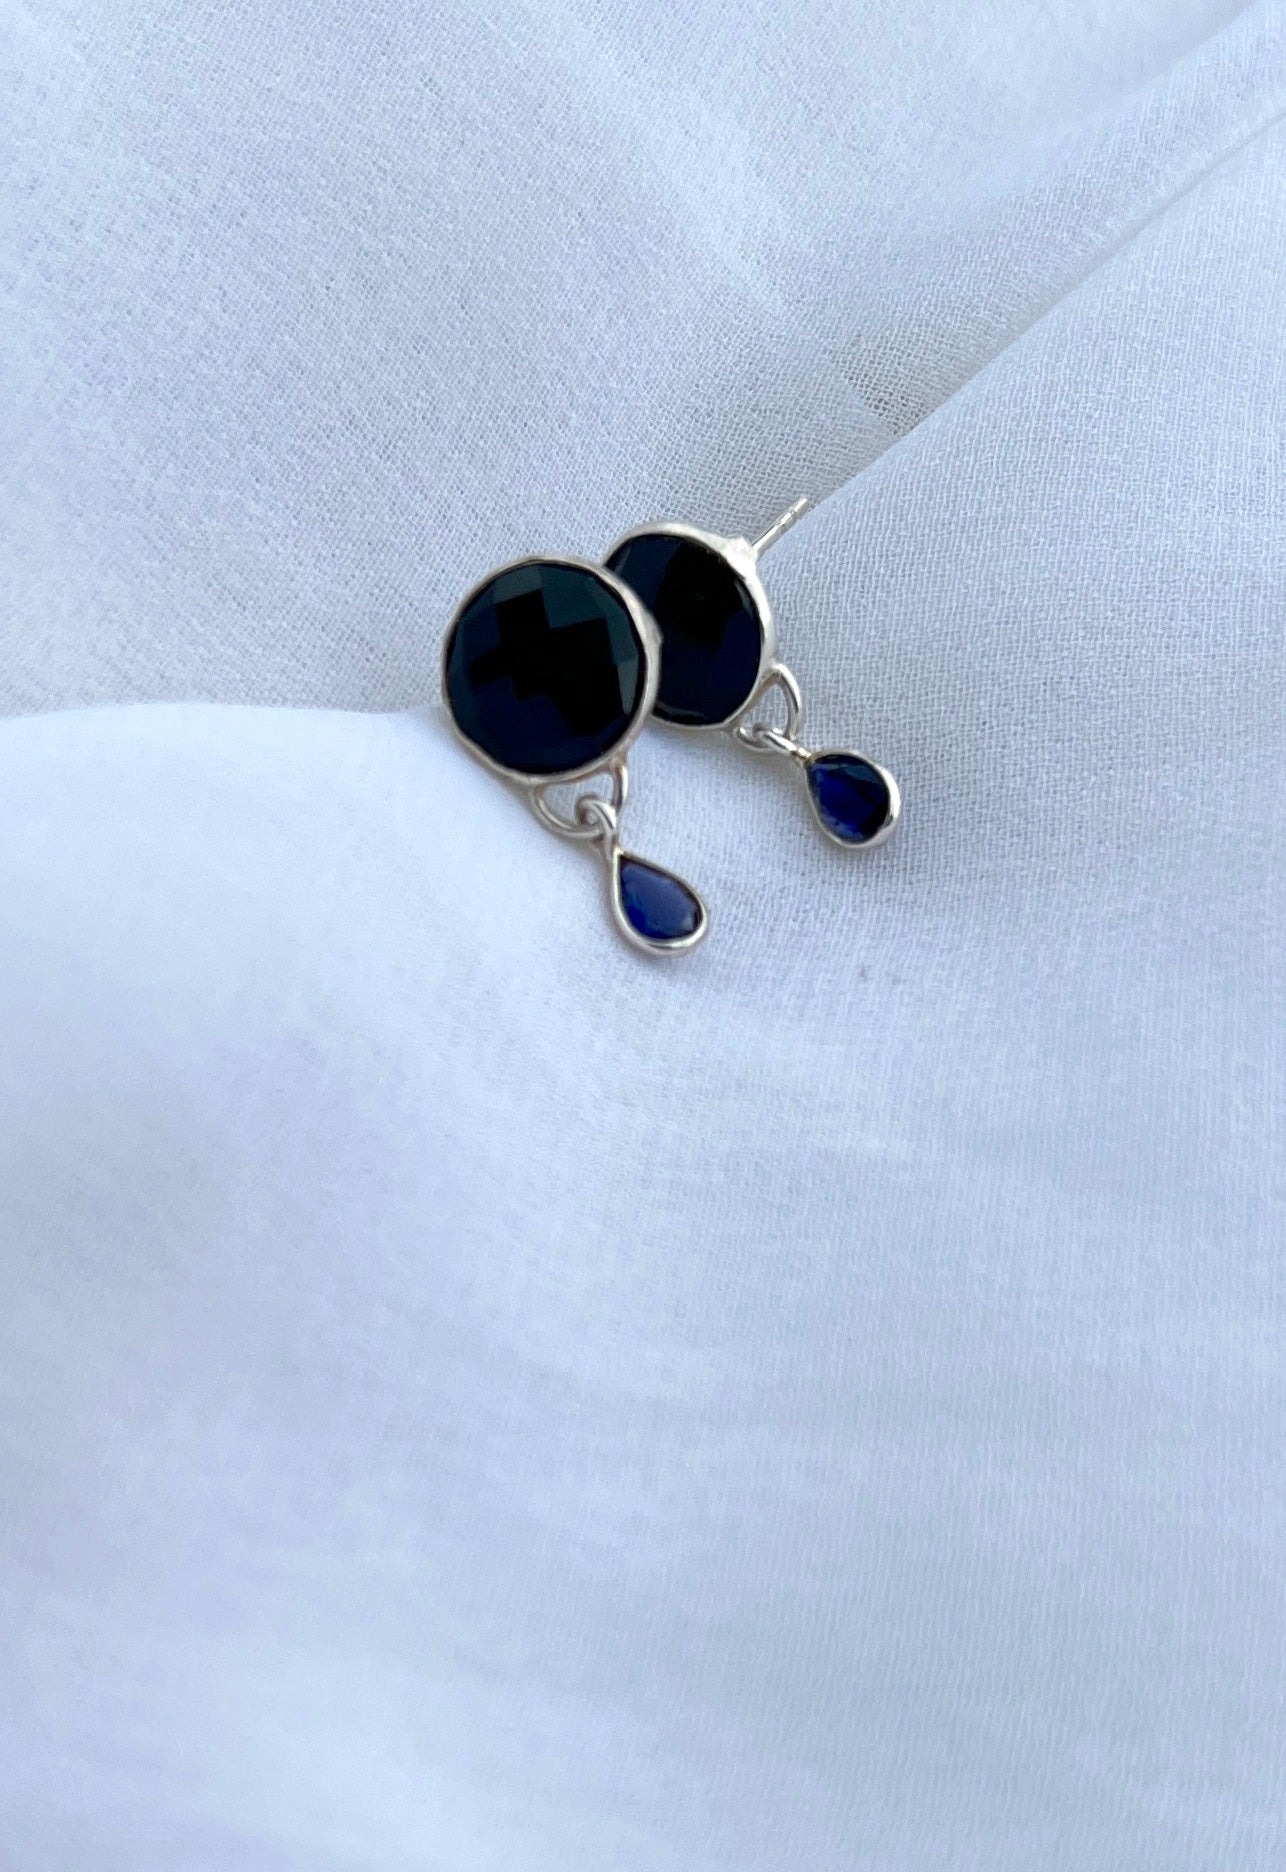 Black Onyx Studs with a small Amethyst drop - 925 Silver